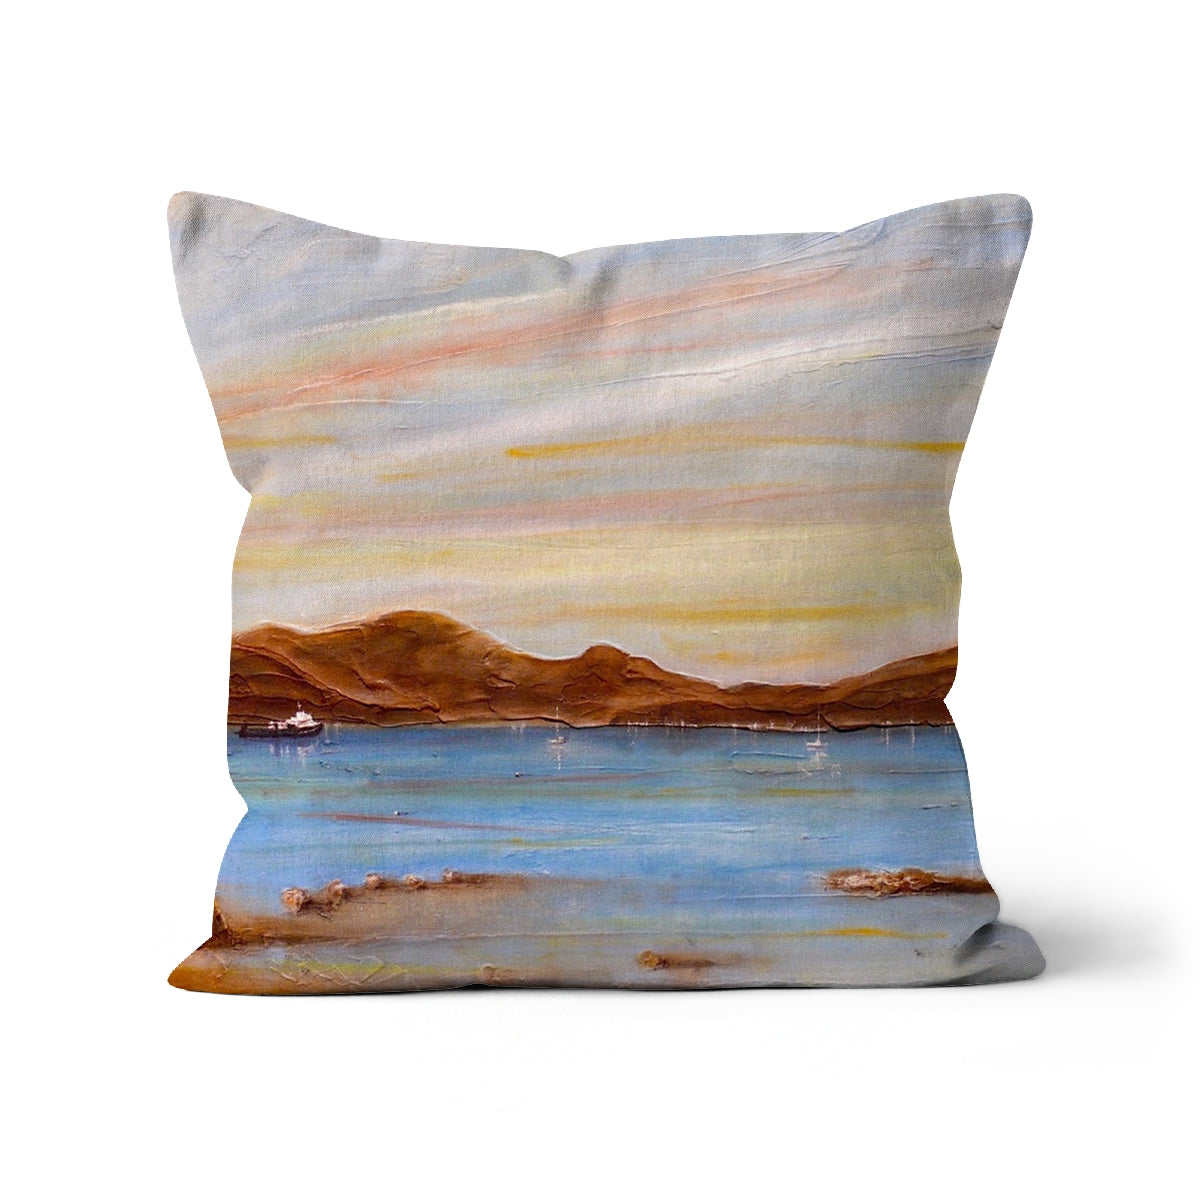 The Last Ferry To Dunoon Art Gifts Cushion-Cushions-River Clyde Art Gallery-Faux Suede-24"x24"-Paintings, Prints, Homeware, Art Gifts From Scotland By Scottish Artist Kevin Hunter